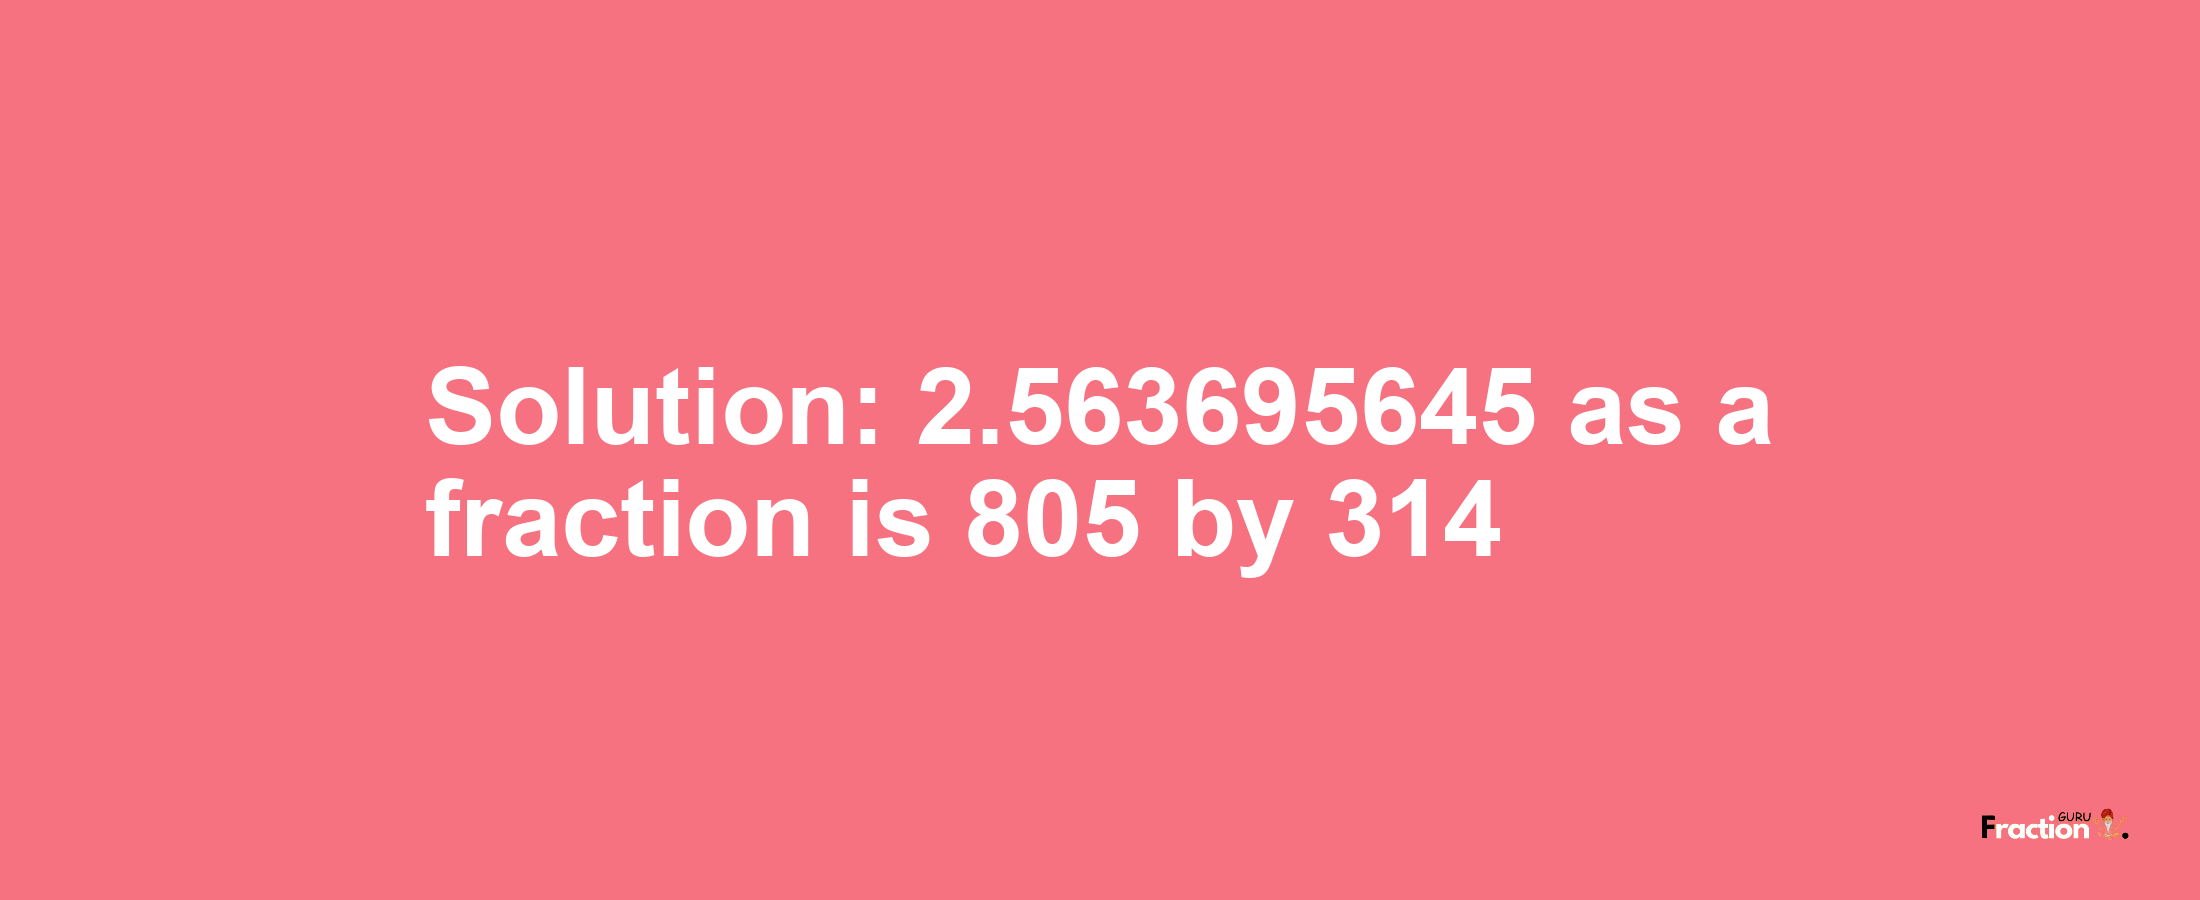 Solution:2.563695645 as a fraction is 805/314